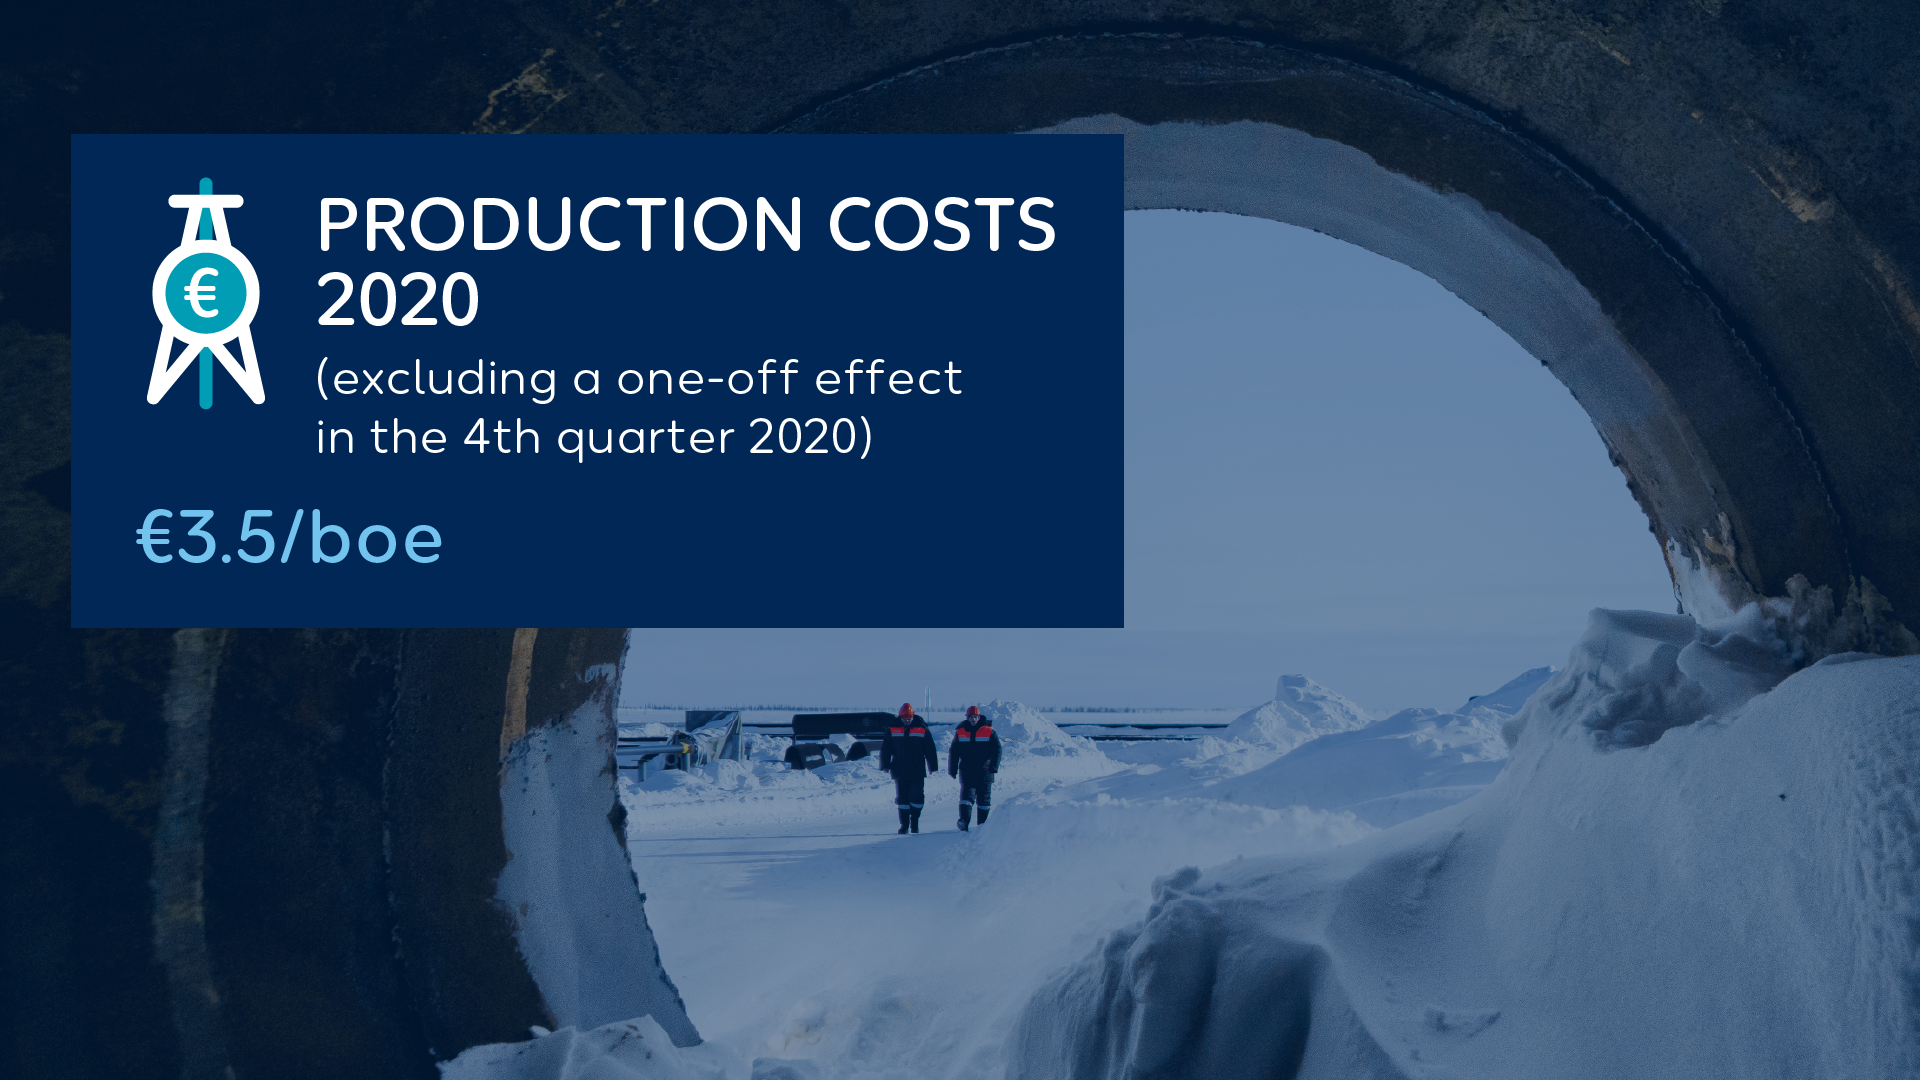 Wintershall Dea Production Costs 2020